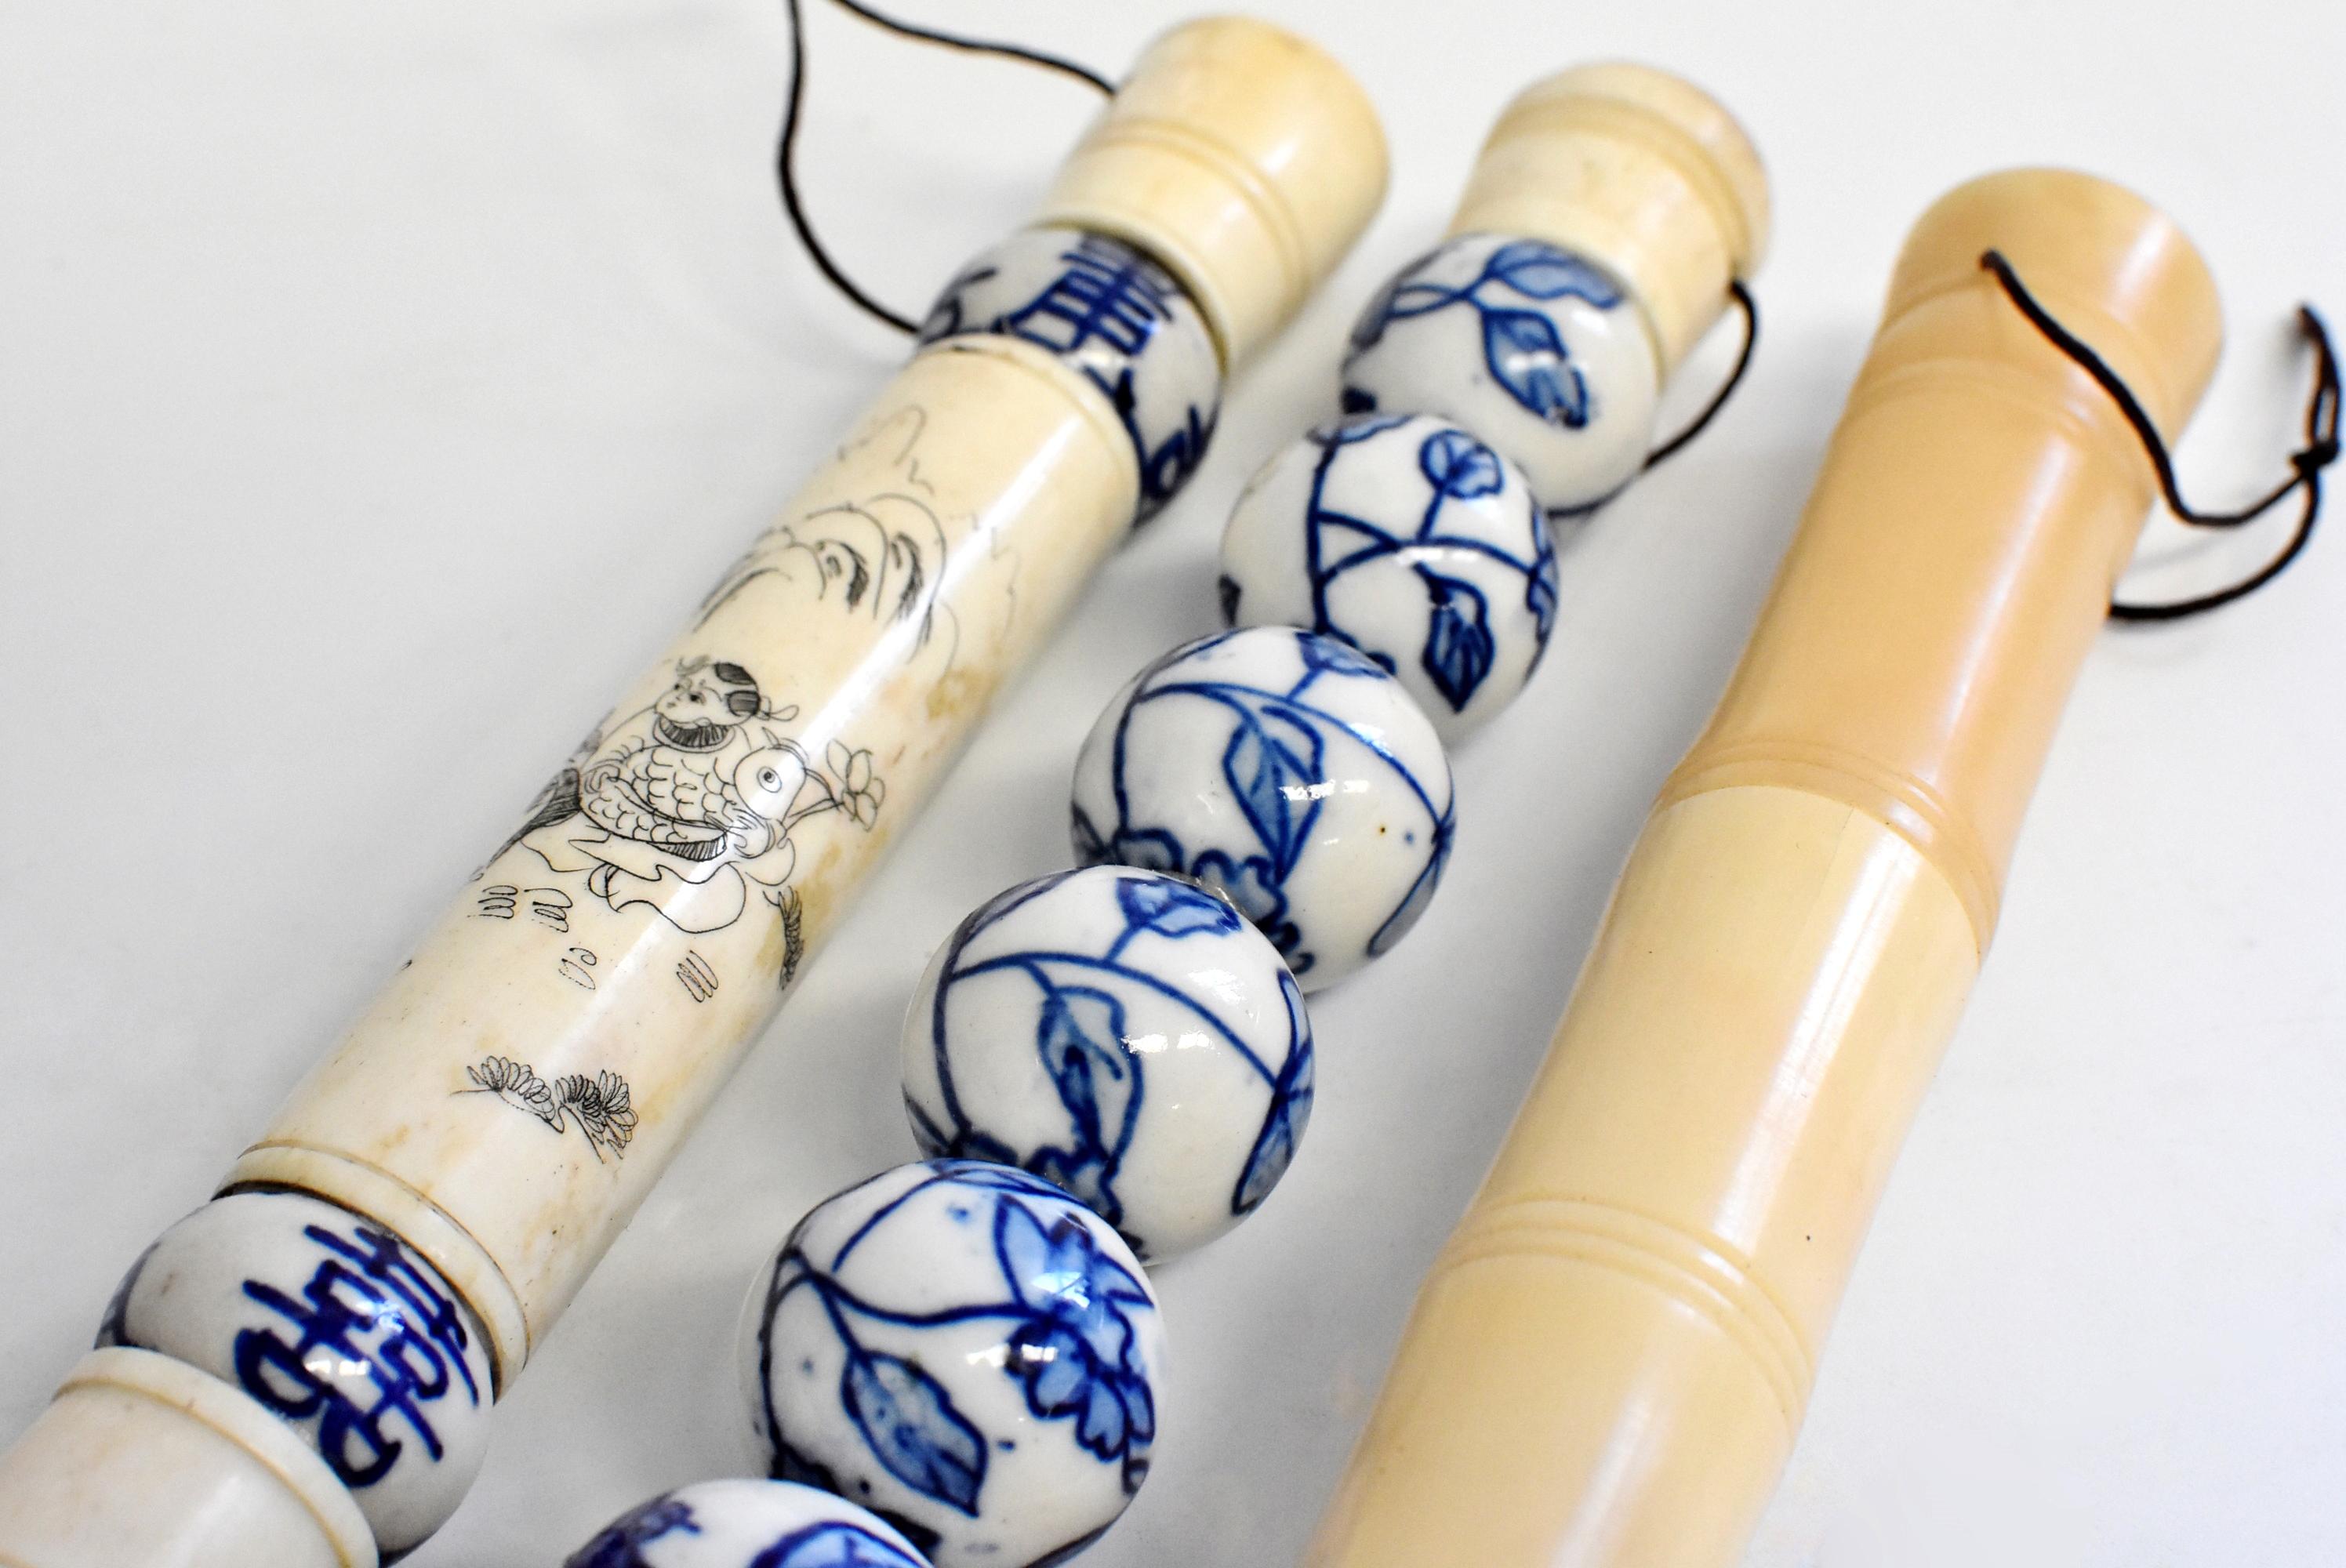 Blue and White Porcelain and Bone Chinese Calligraphy Brushes Set of 3, Large 11